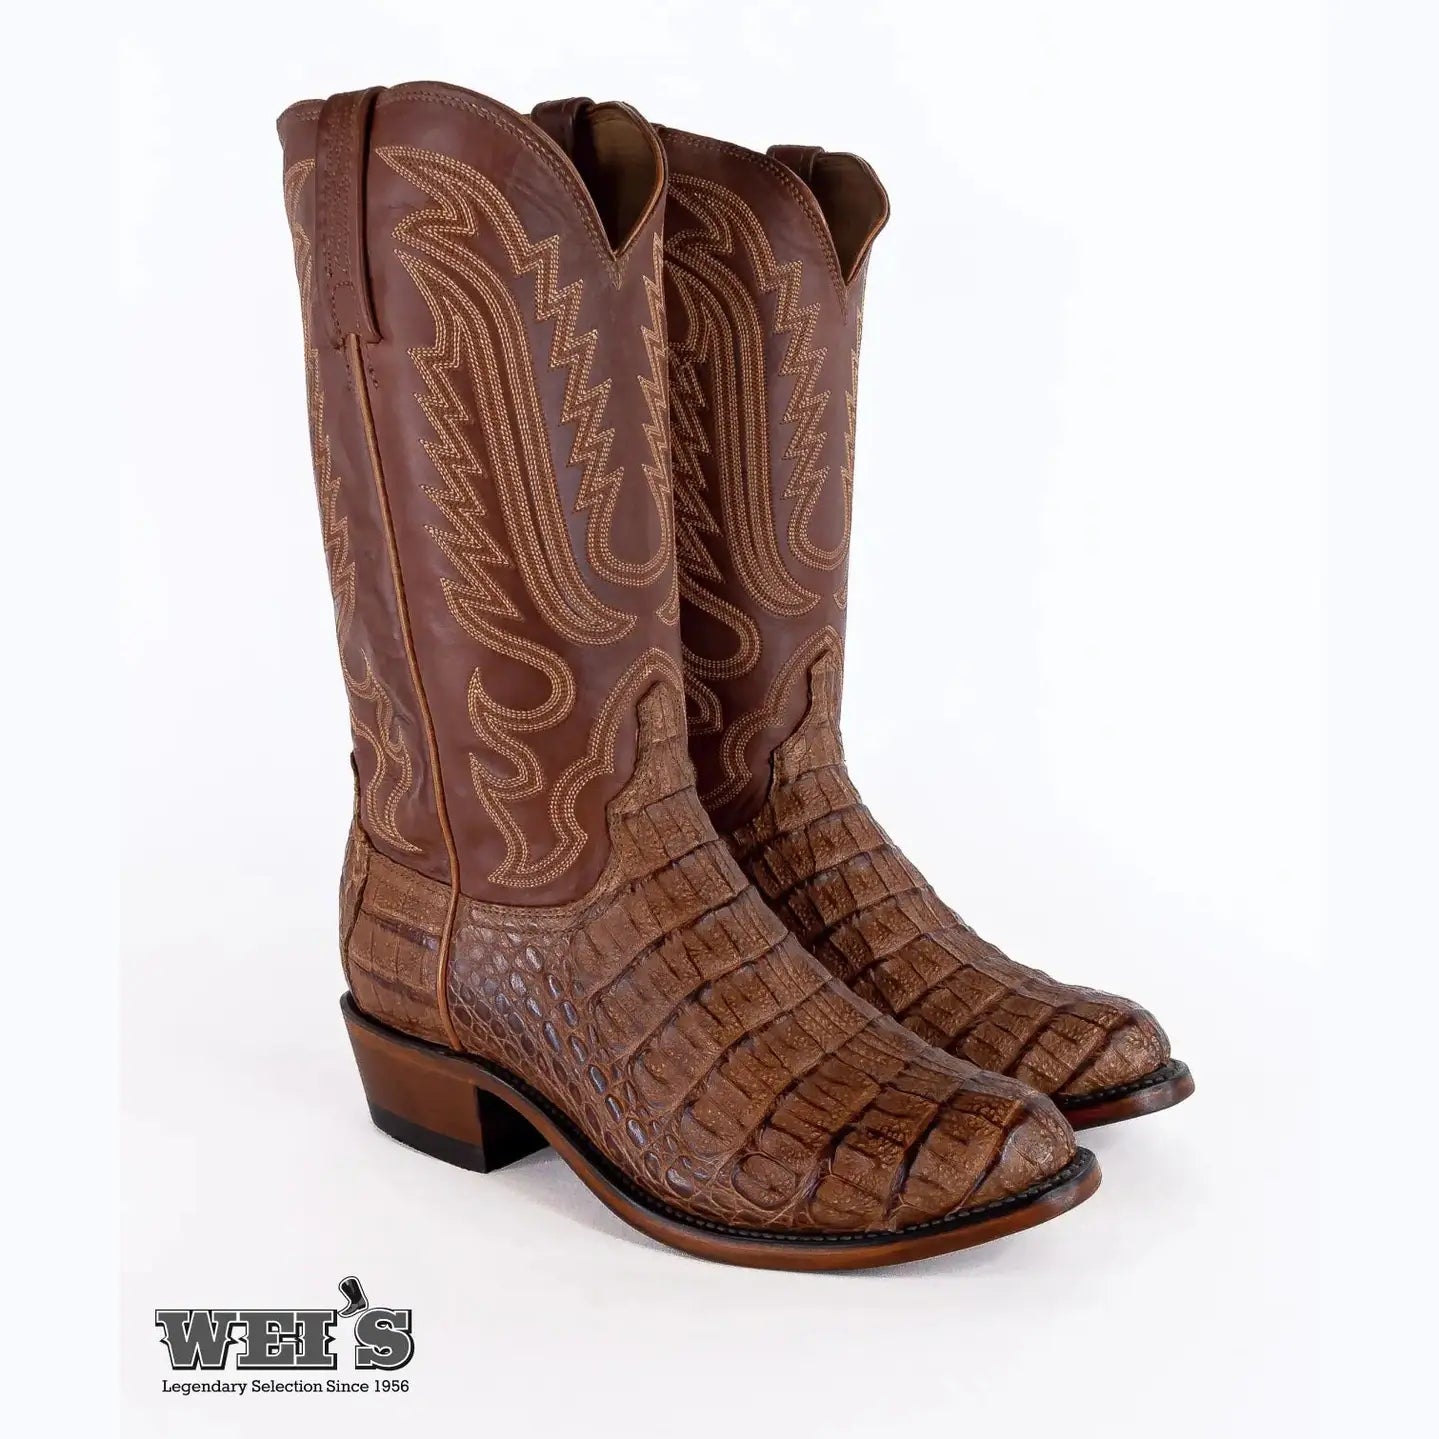 Lucchese Men's Cowboy Boots 13.75" Exotic Caiman Roper Toe N1157.R3